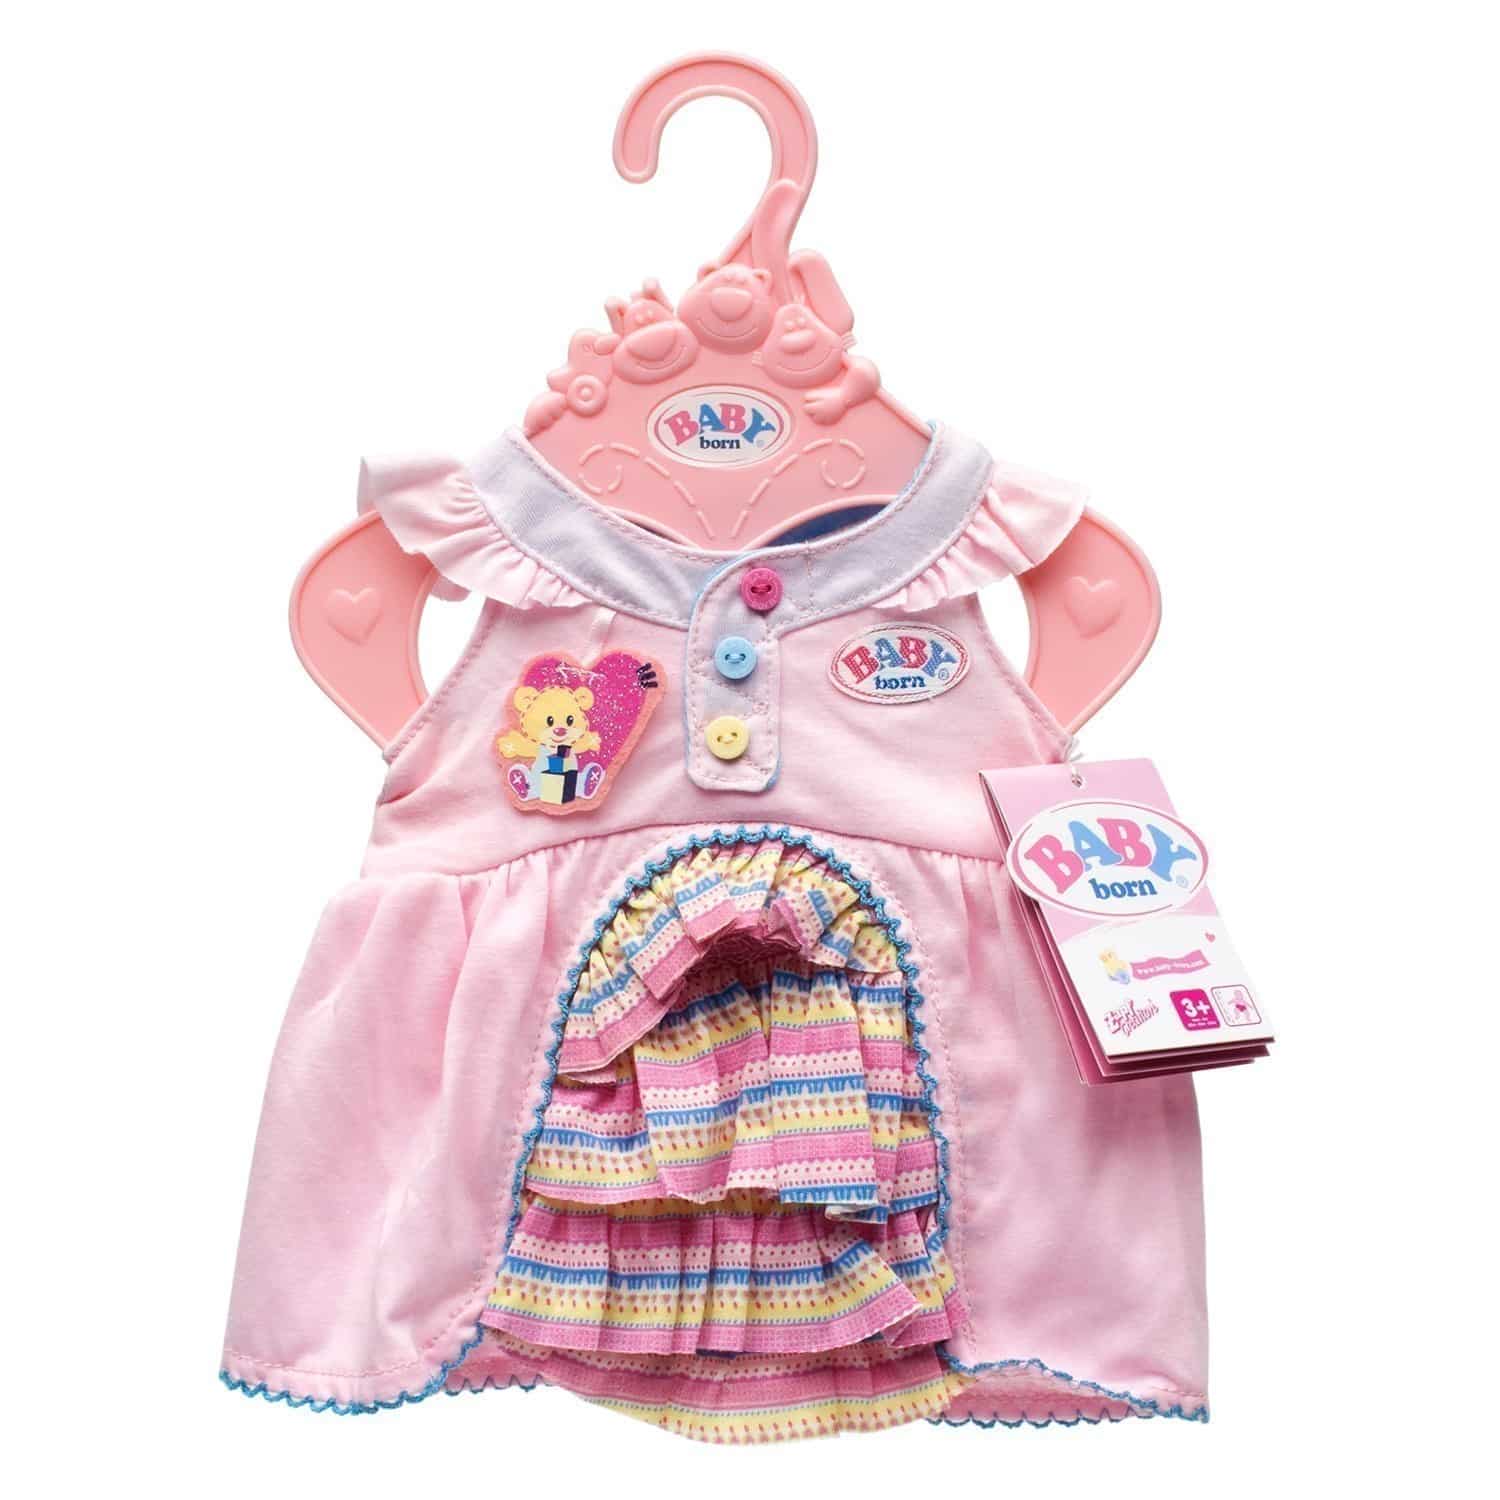 Baby Born - Baby Dress Collection - Pink Frills